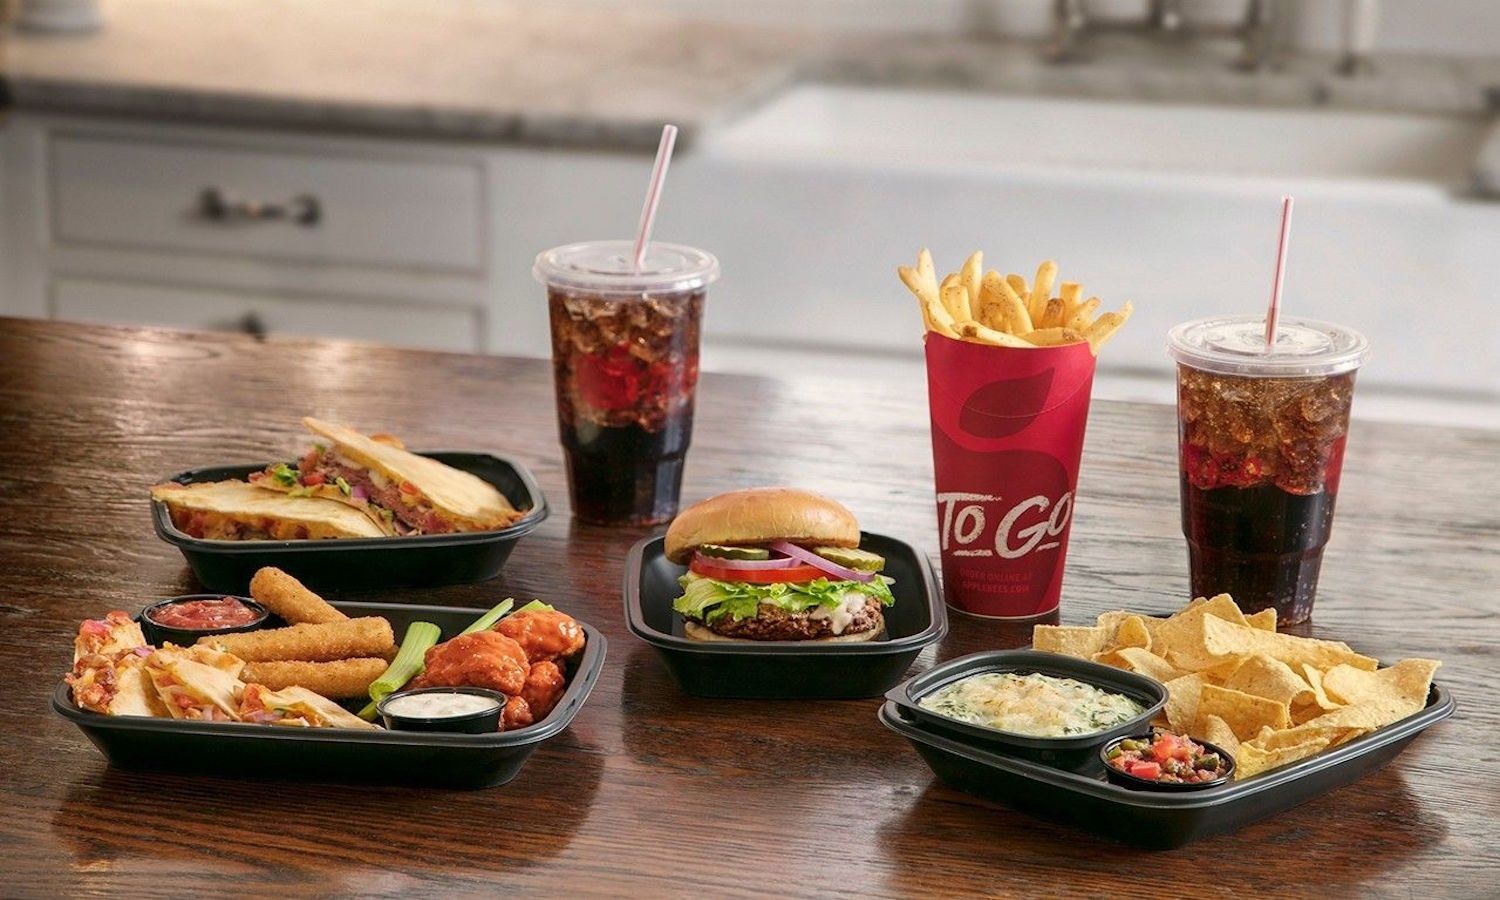 Applebee’s Takeout Near You in Omaha